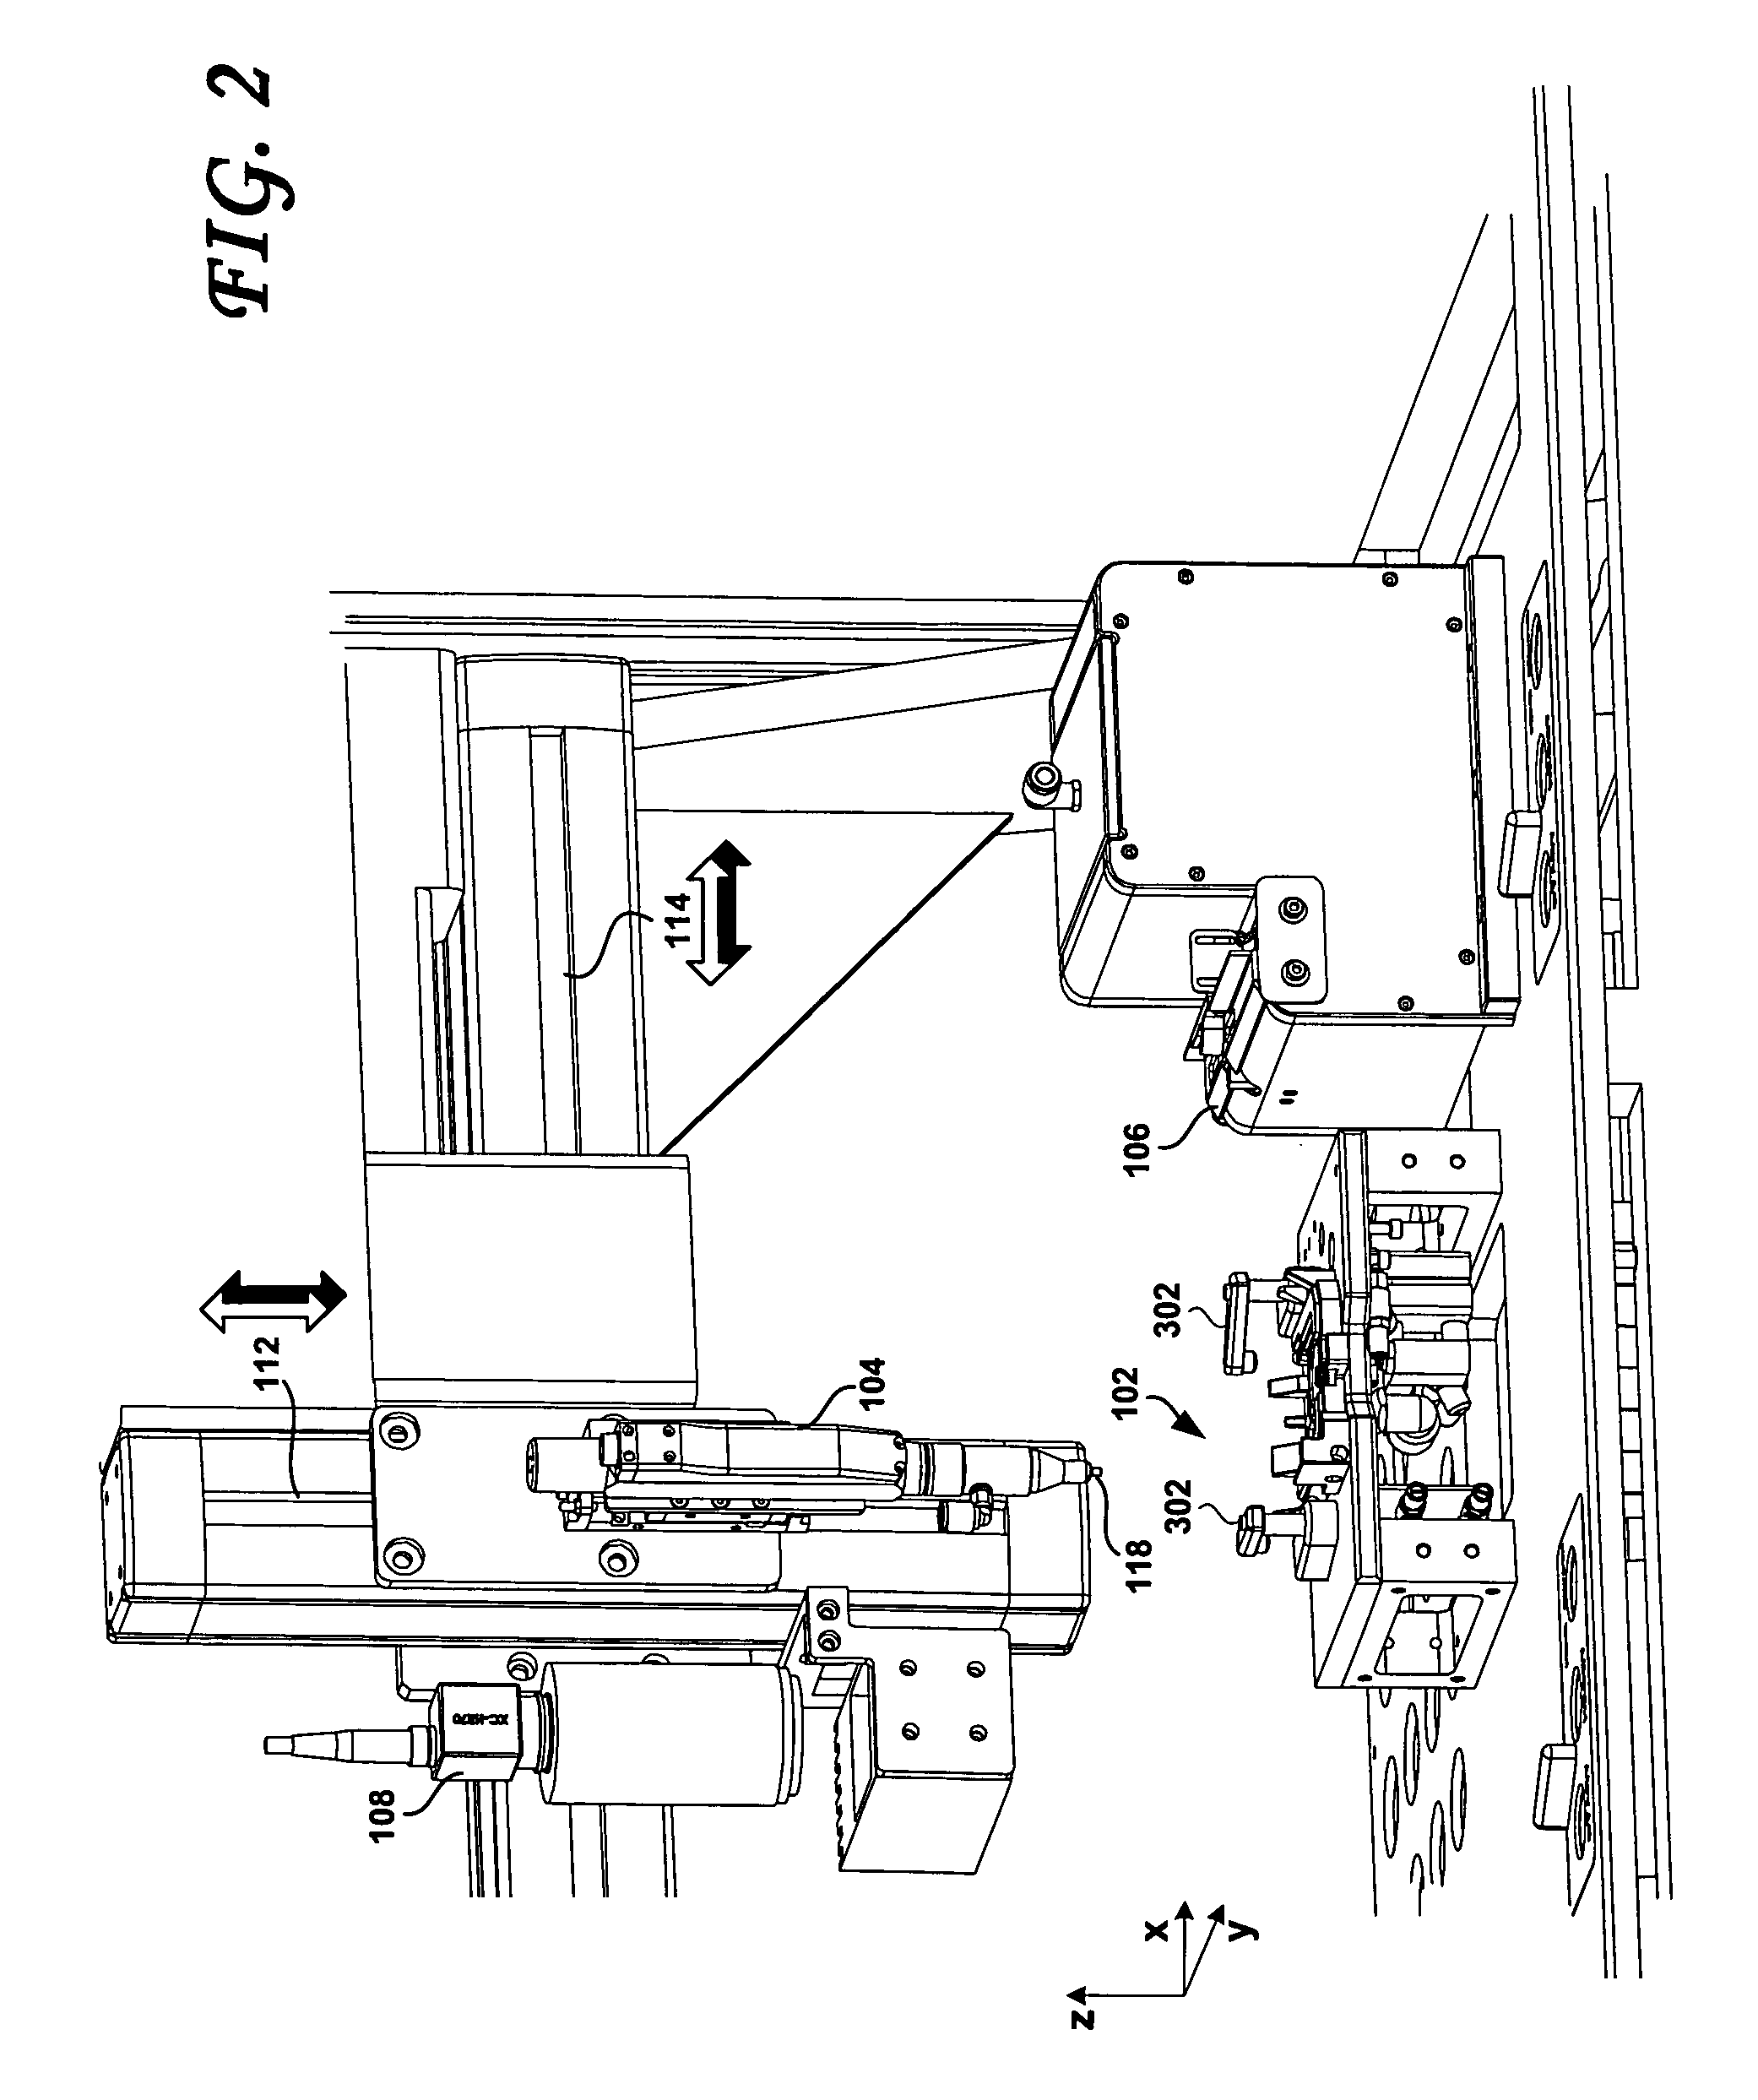 Methods for picking and placing workpieces into small form factor hard disk drives